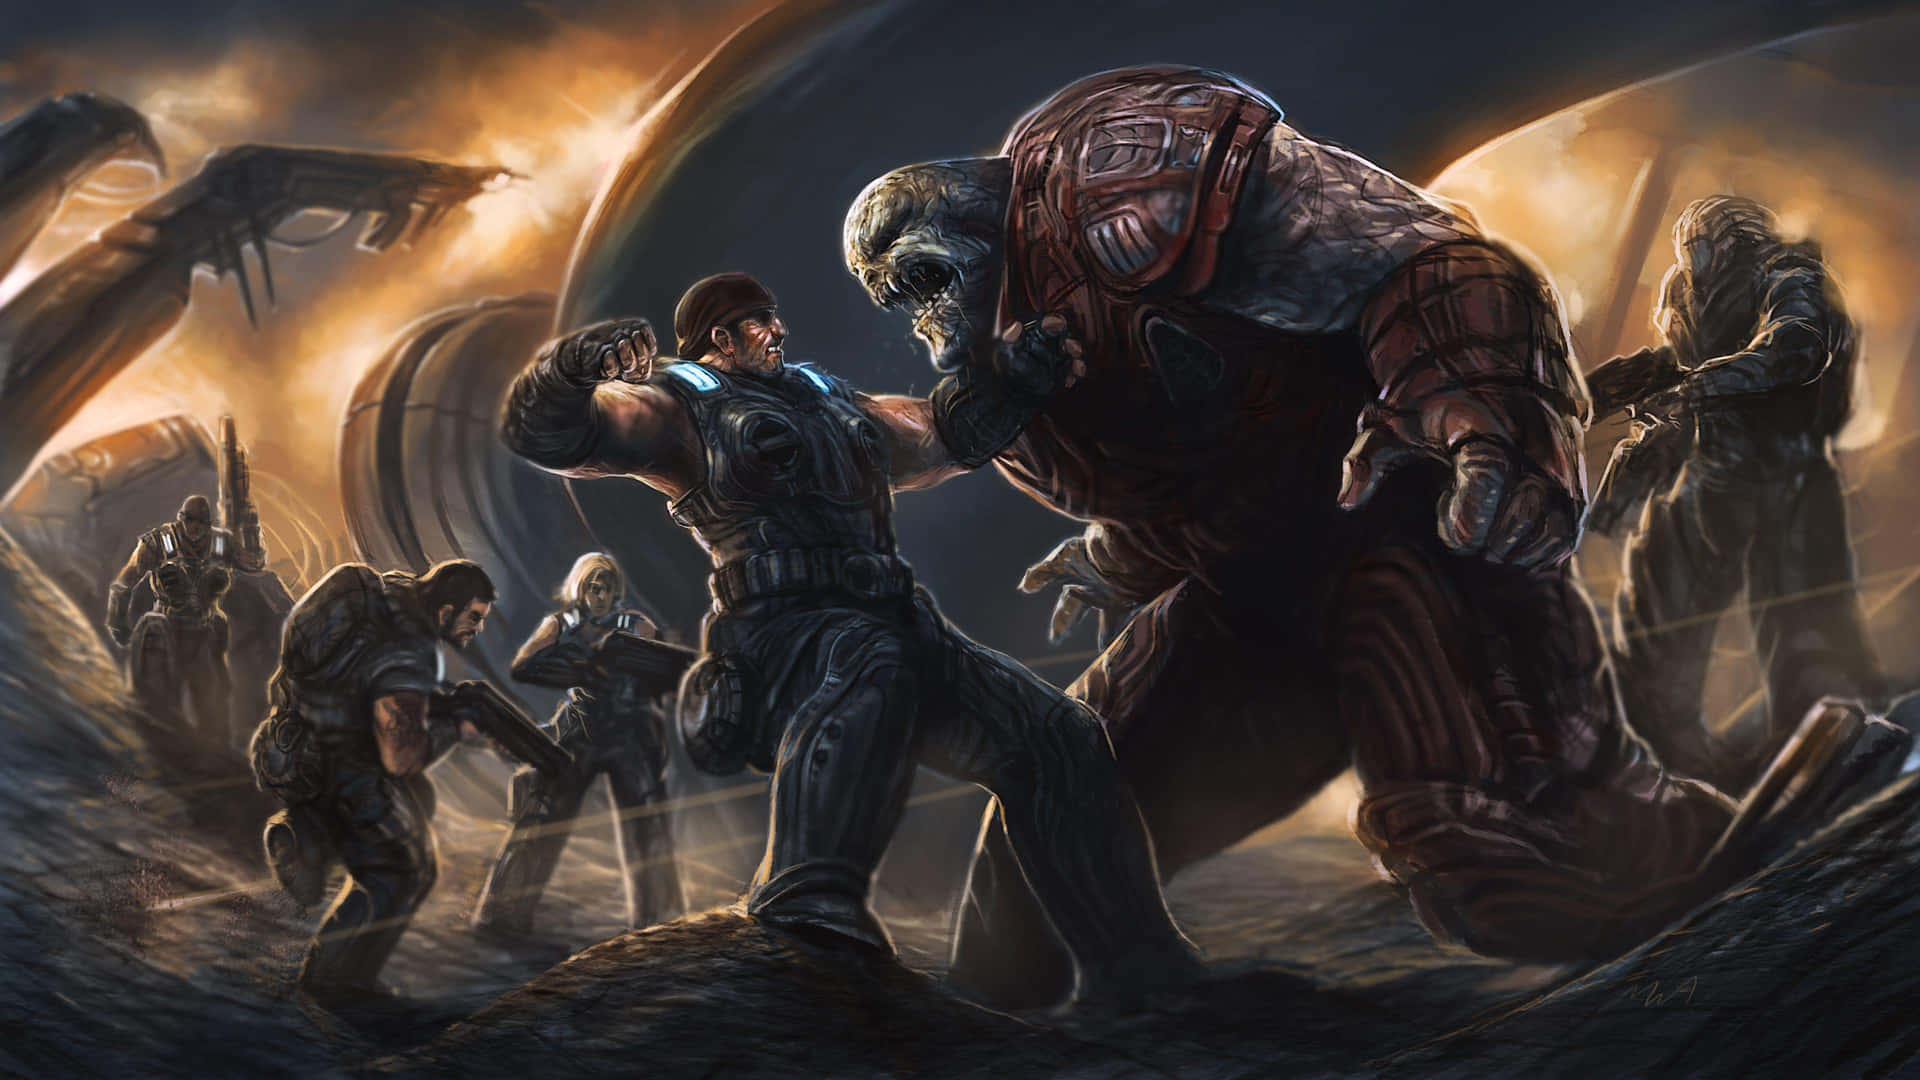 A Group Of People Fighting In A Dark Environment Wallpaper